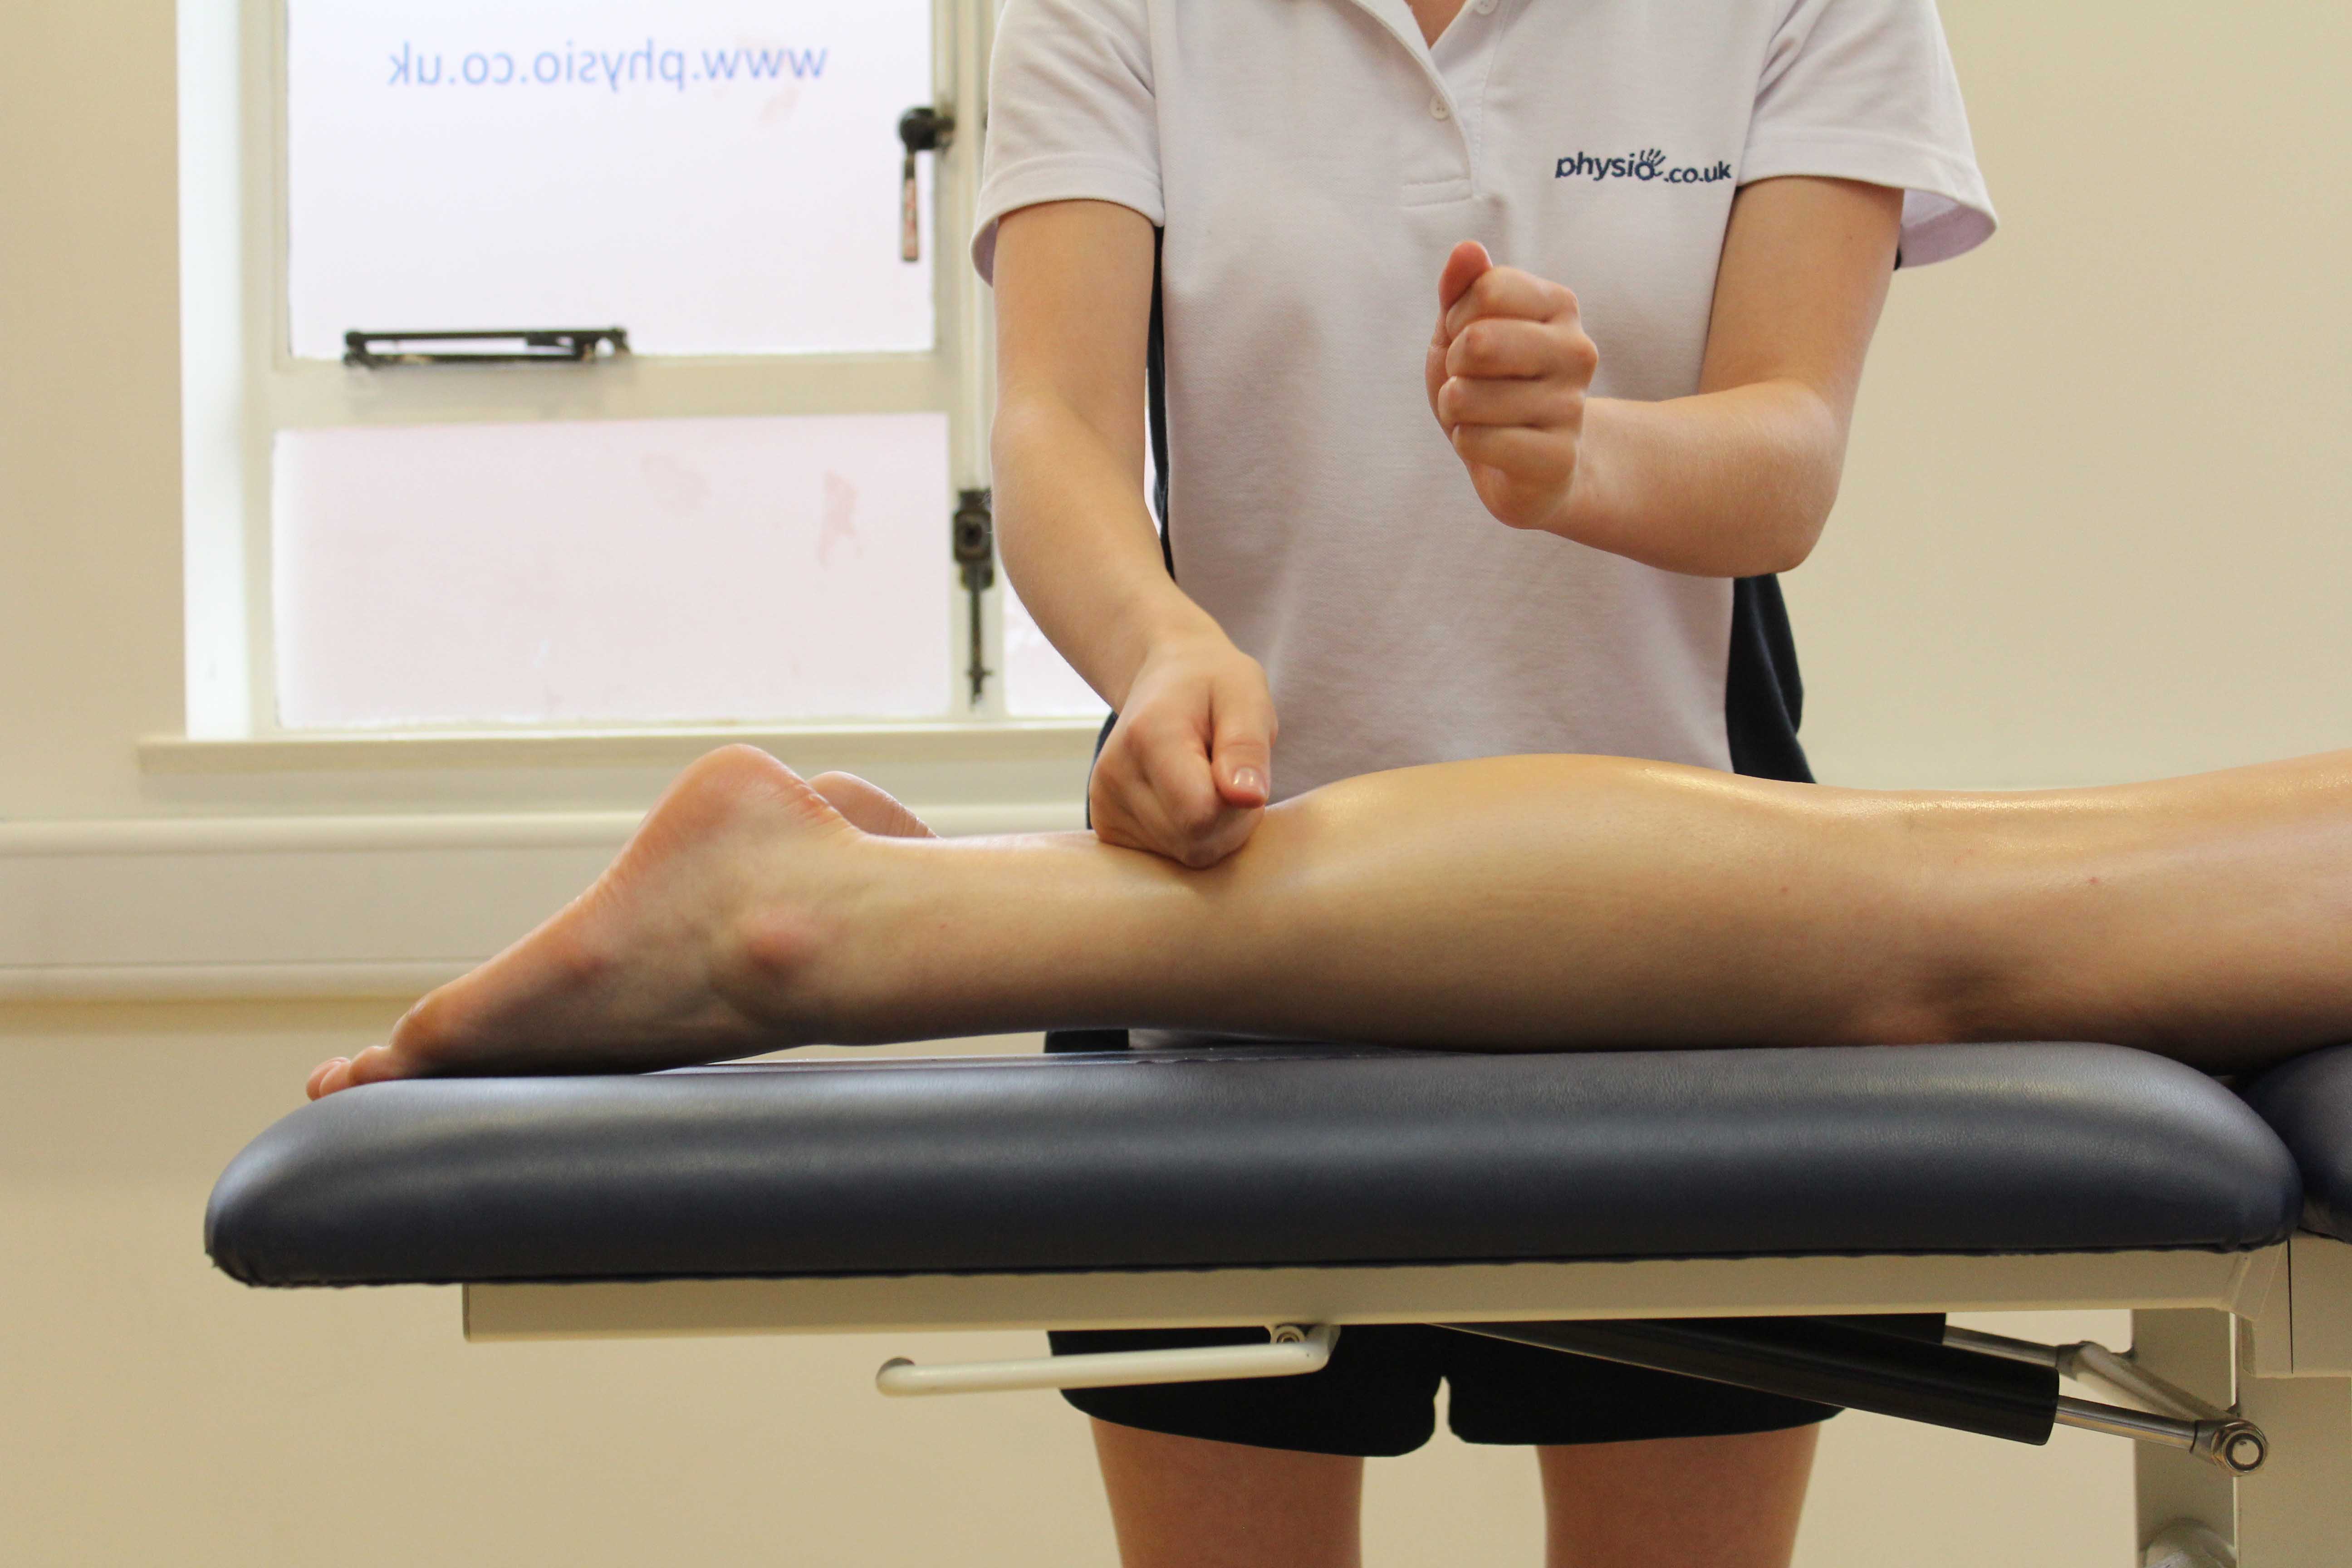 Beating percussion massage applied to the gastrocnemius muscle by experienced therapist